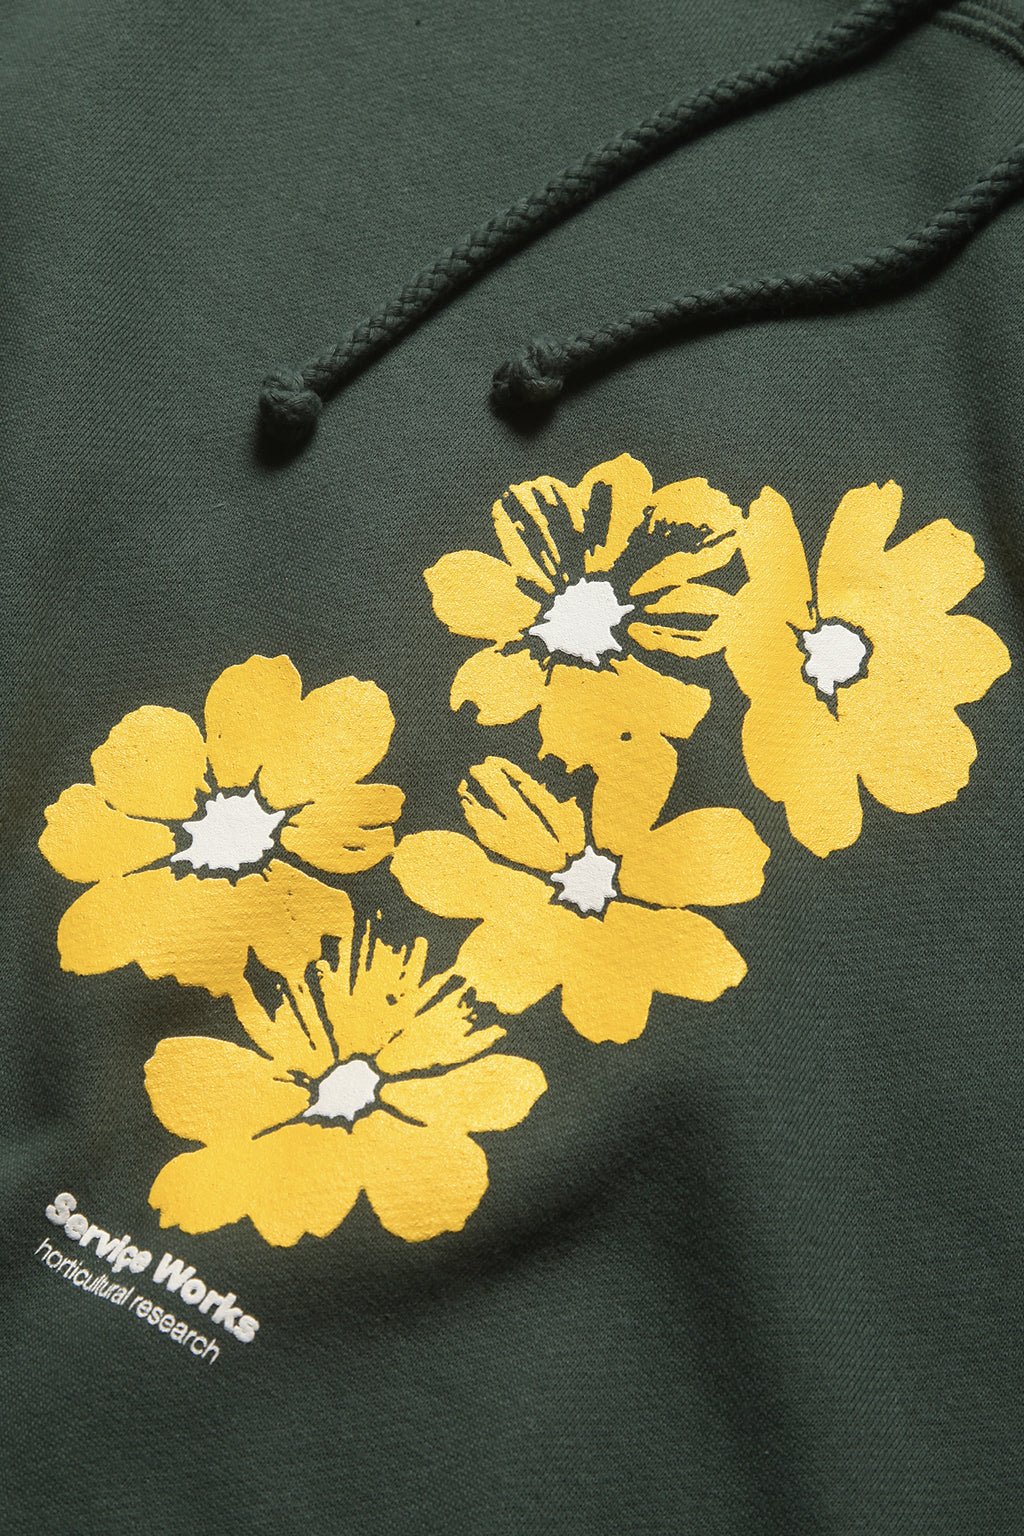 Service Works - Horticultural Research Hoodie - Forest Green